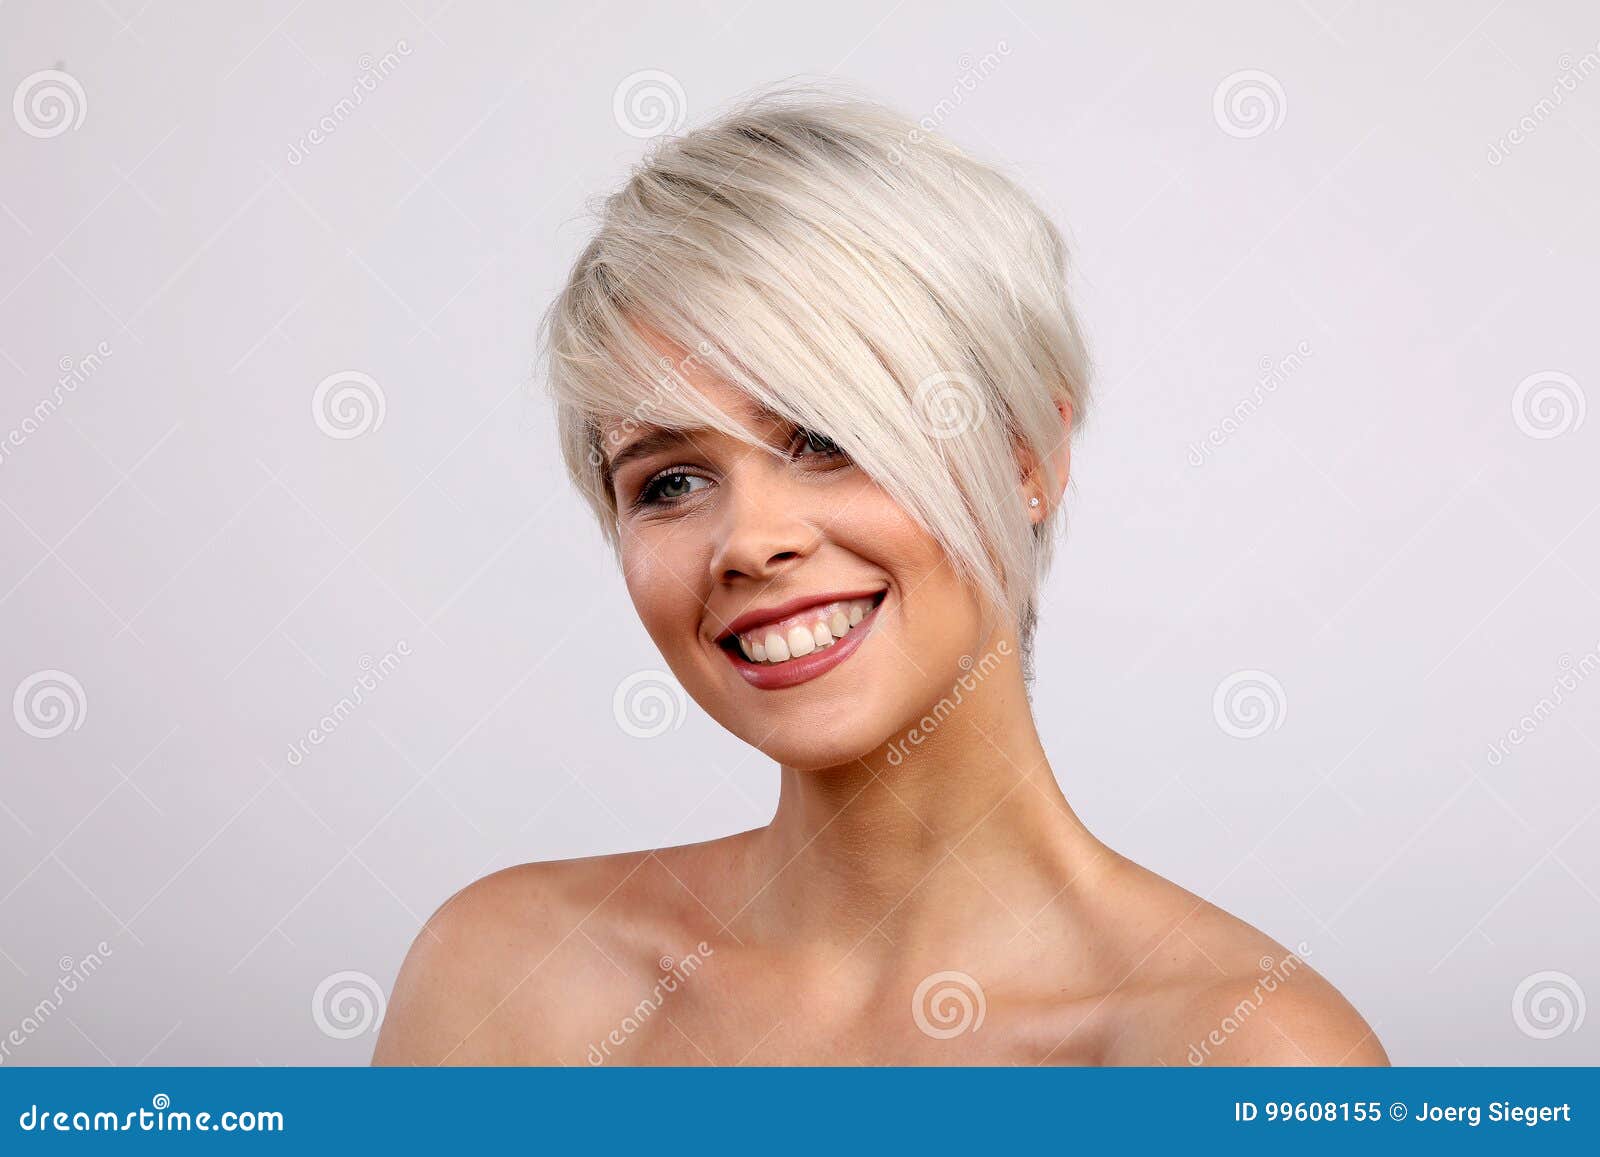 Blond Woman With Naked Shoulders Smiling Stock Photo 